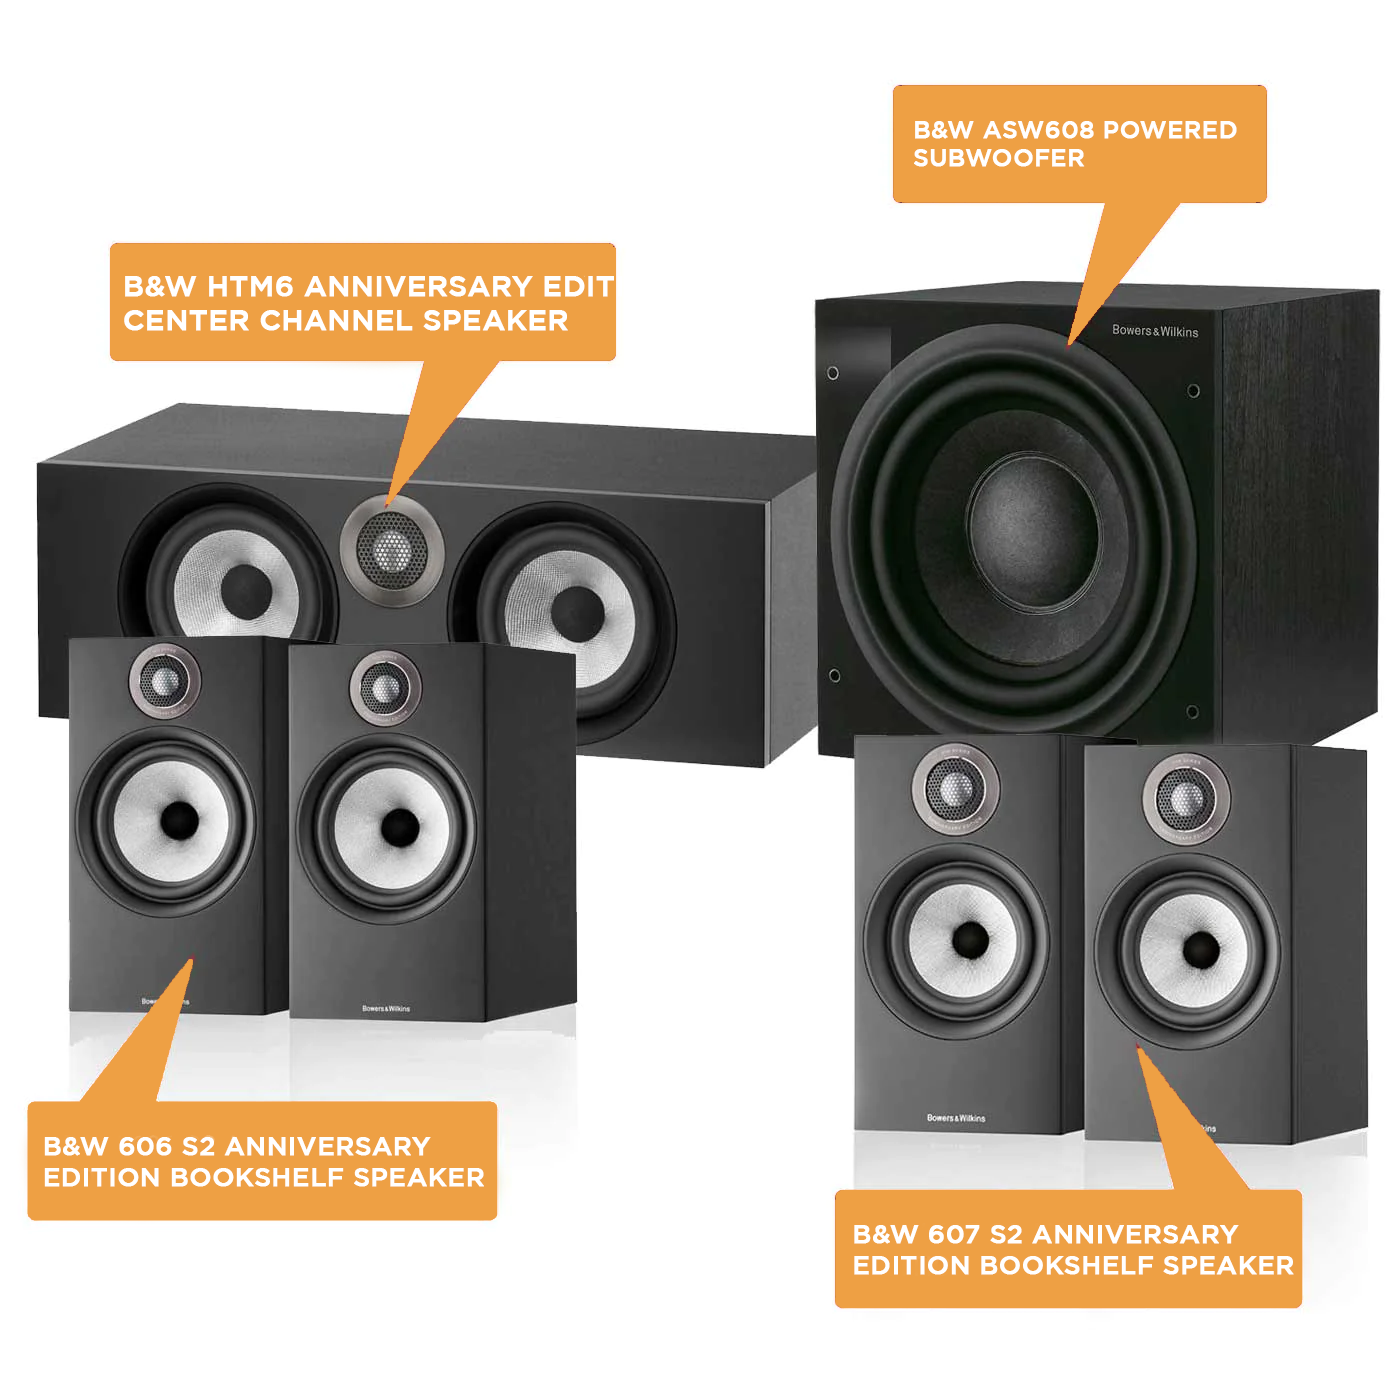 Bowers & Wilkins (B&W) 600 Series Anniversary Edition 5.1 Channel Home Theatre Speaker Package with B&W ASW608 Subwoofer